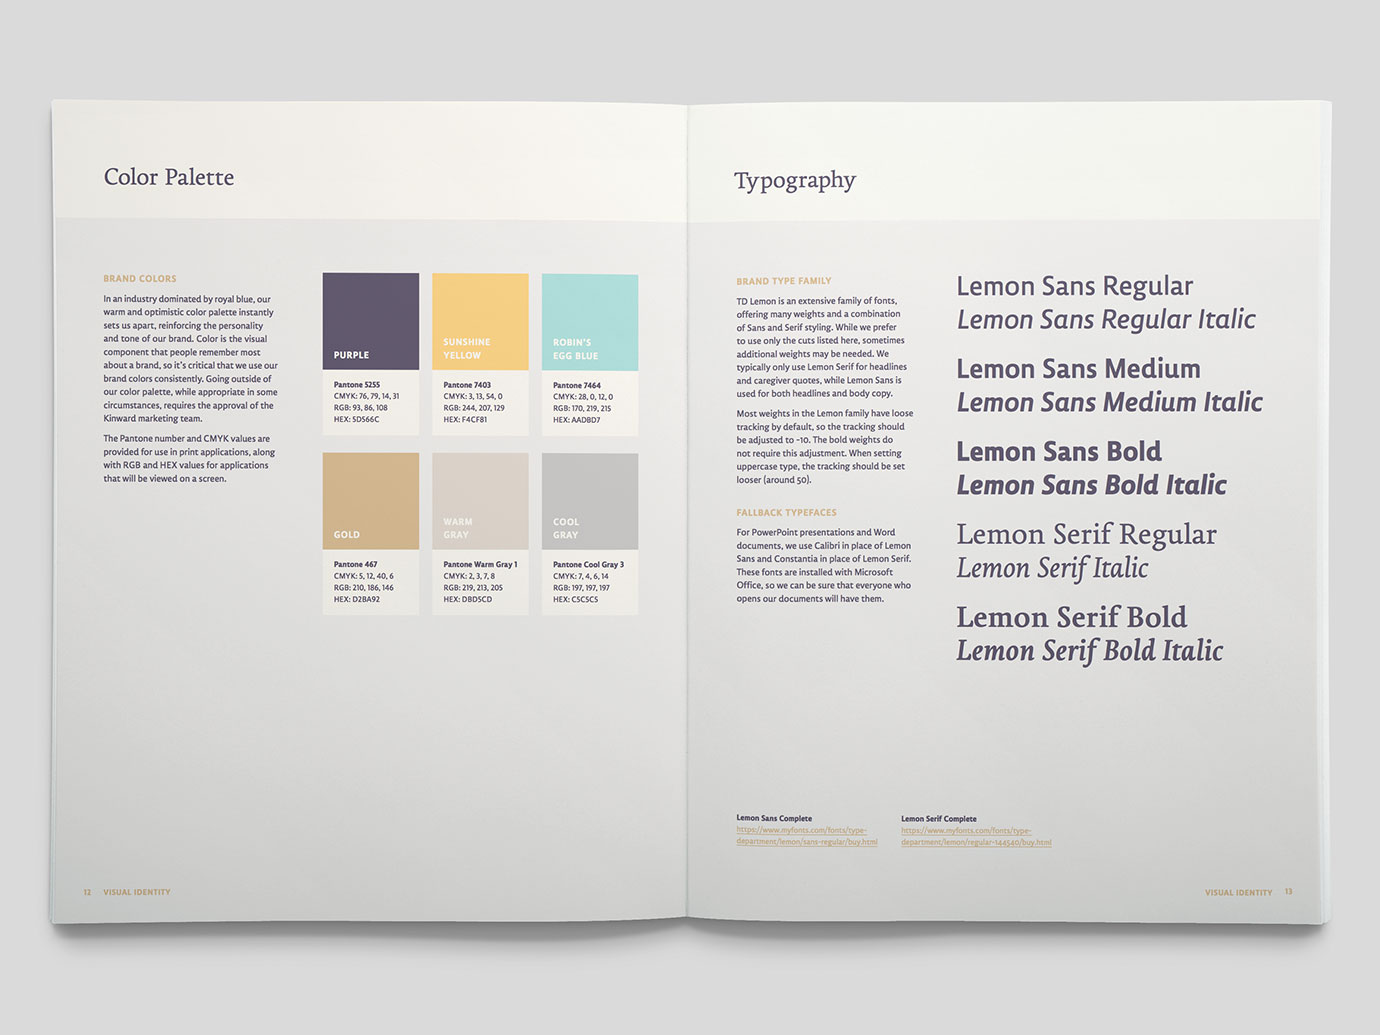 Kinward Brand Manual, Color Palette and Typography